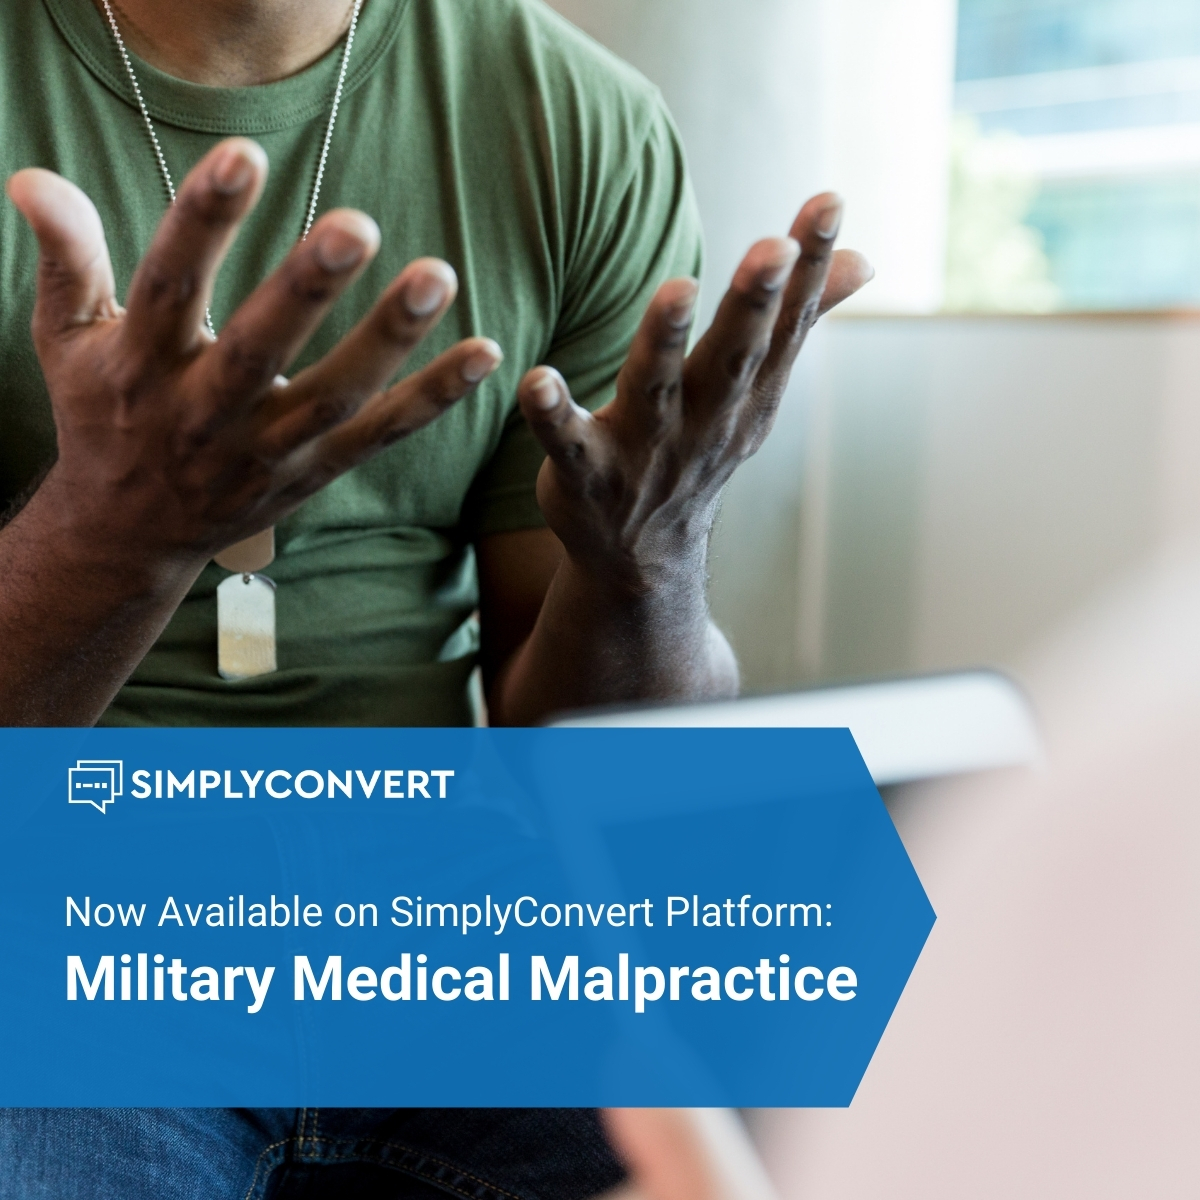 Member of Military with Medical Malpractice Claim